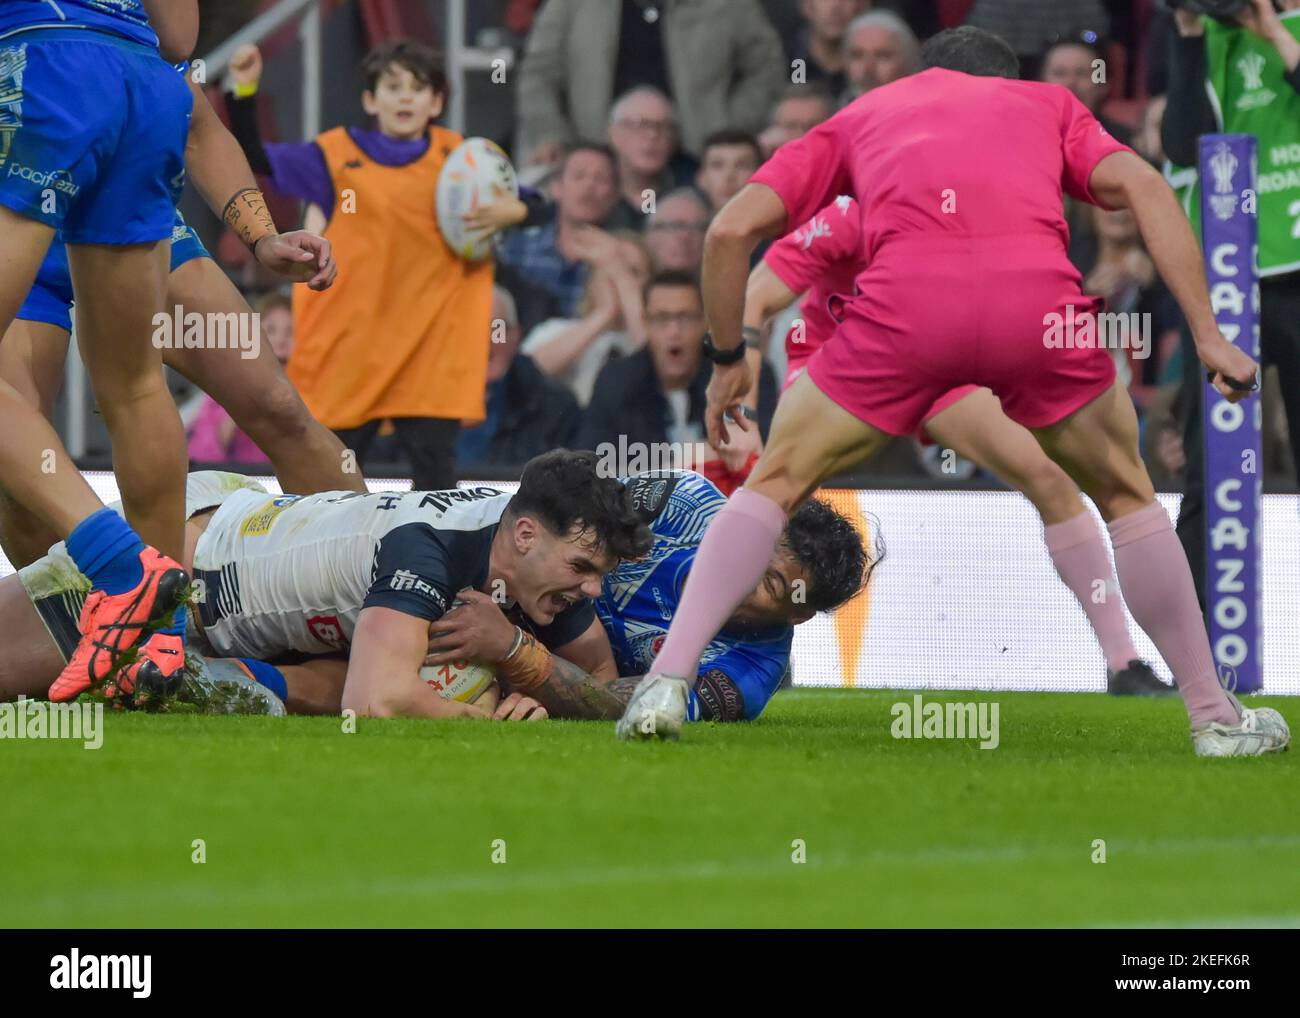 London, UK. 12th Nov 2022. Herbie Farnworth of England scores a try   Rugby League World Cup 2021 semi final between England and Samoa at The Emirates, Arsenal, London, UK on November 12 2022   (Photo by Craig Cresswell/Alamy Live News) Stock Photo